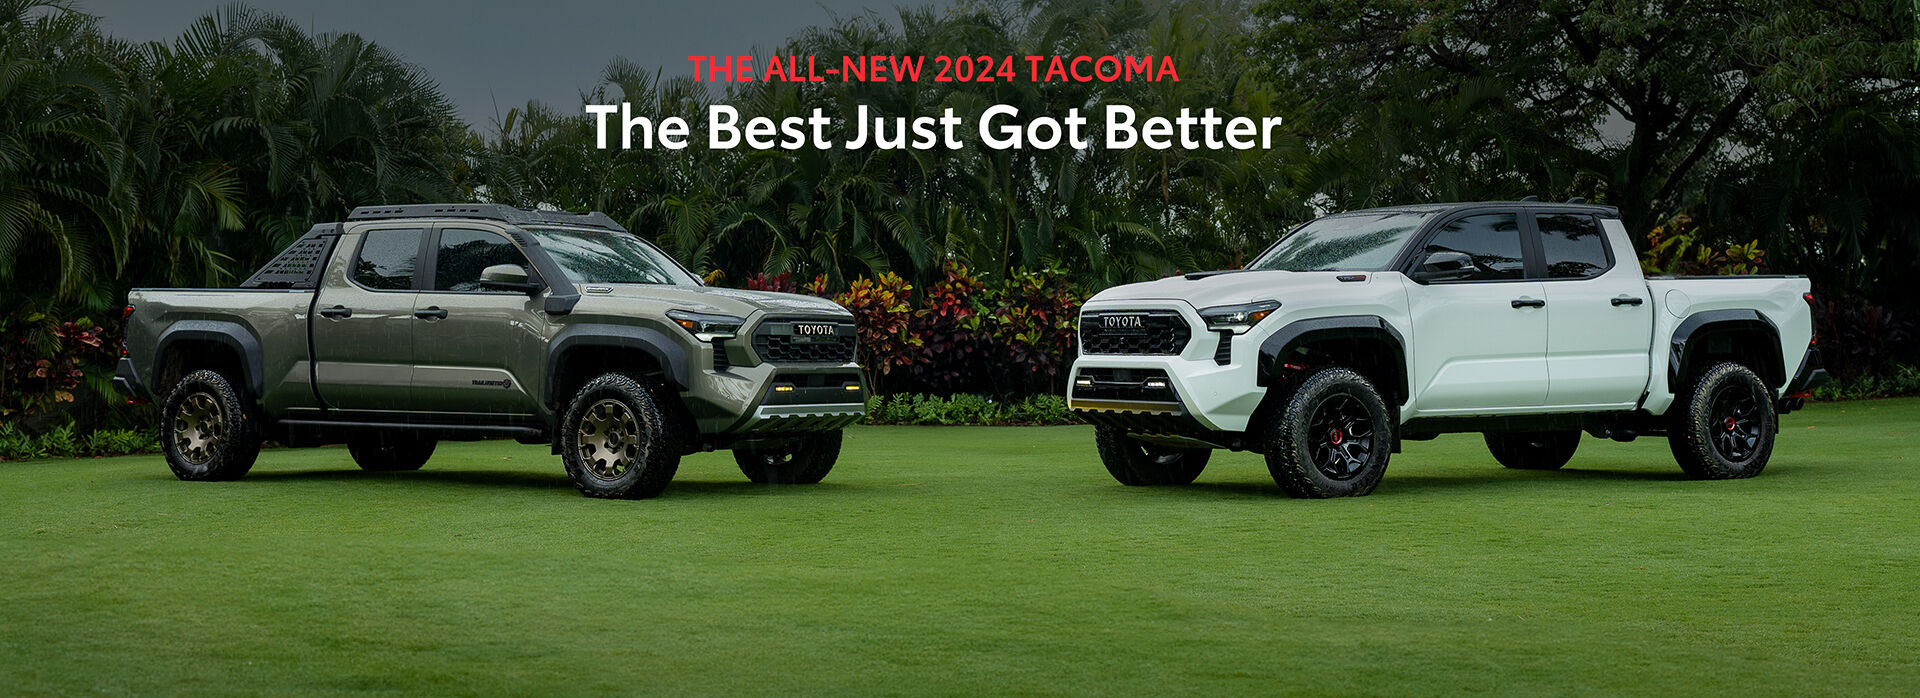 The All-New 2024 Tacoma, The best Just Got Better